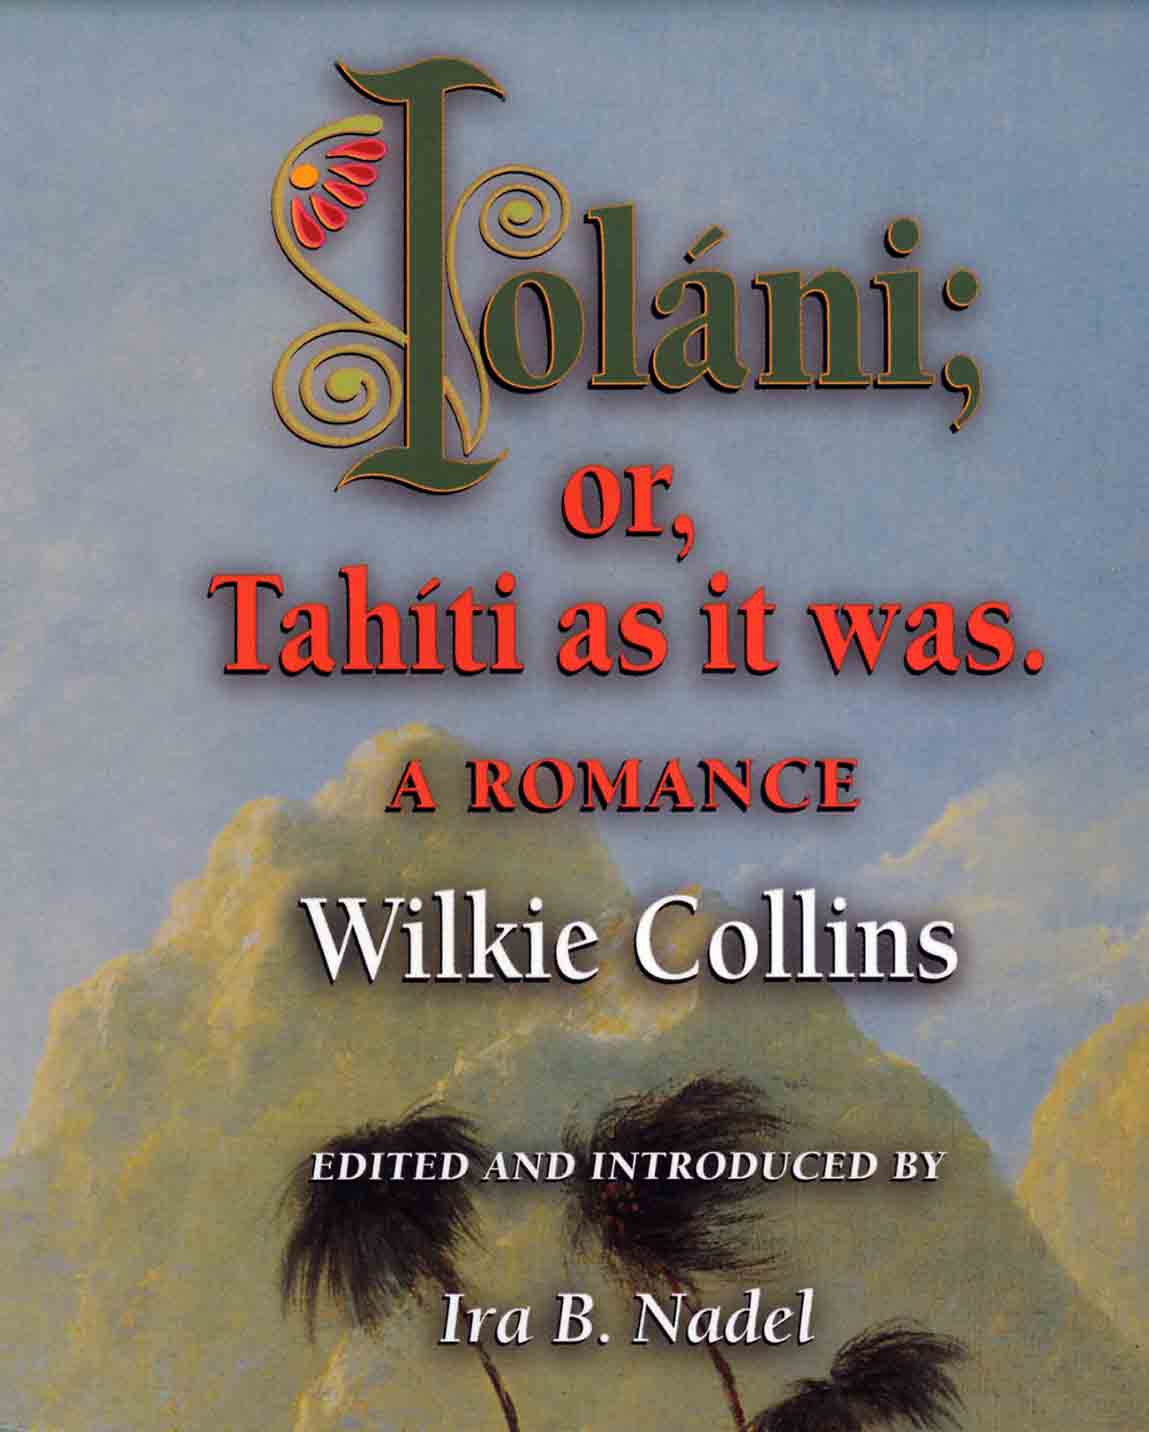 Iolani - first published edition in 1999.